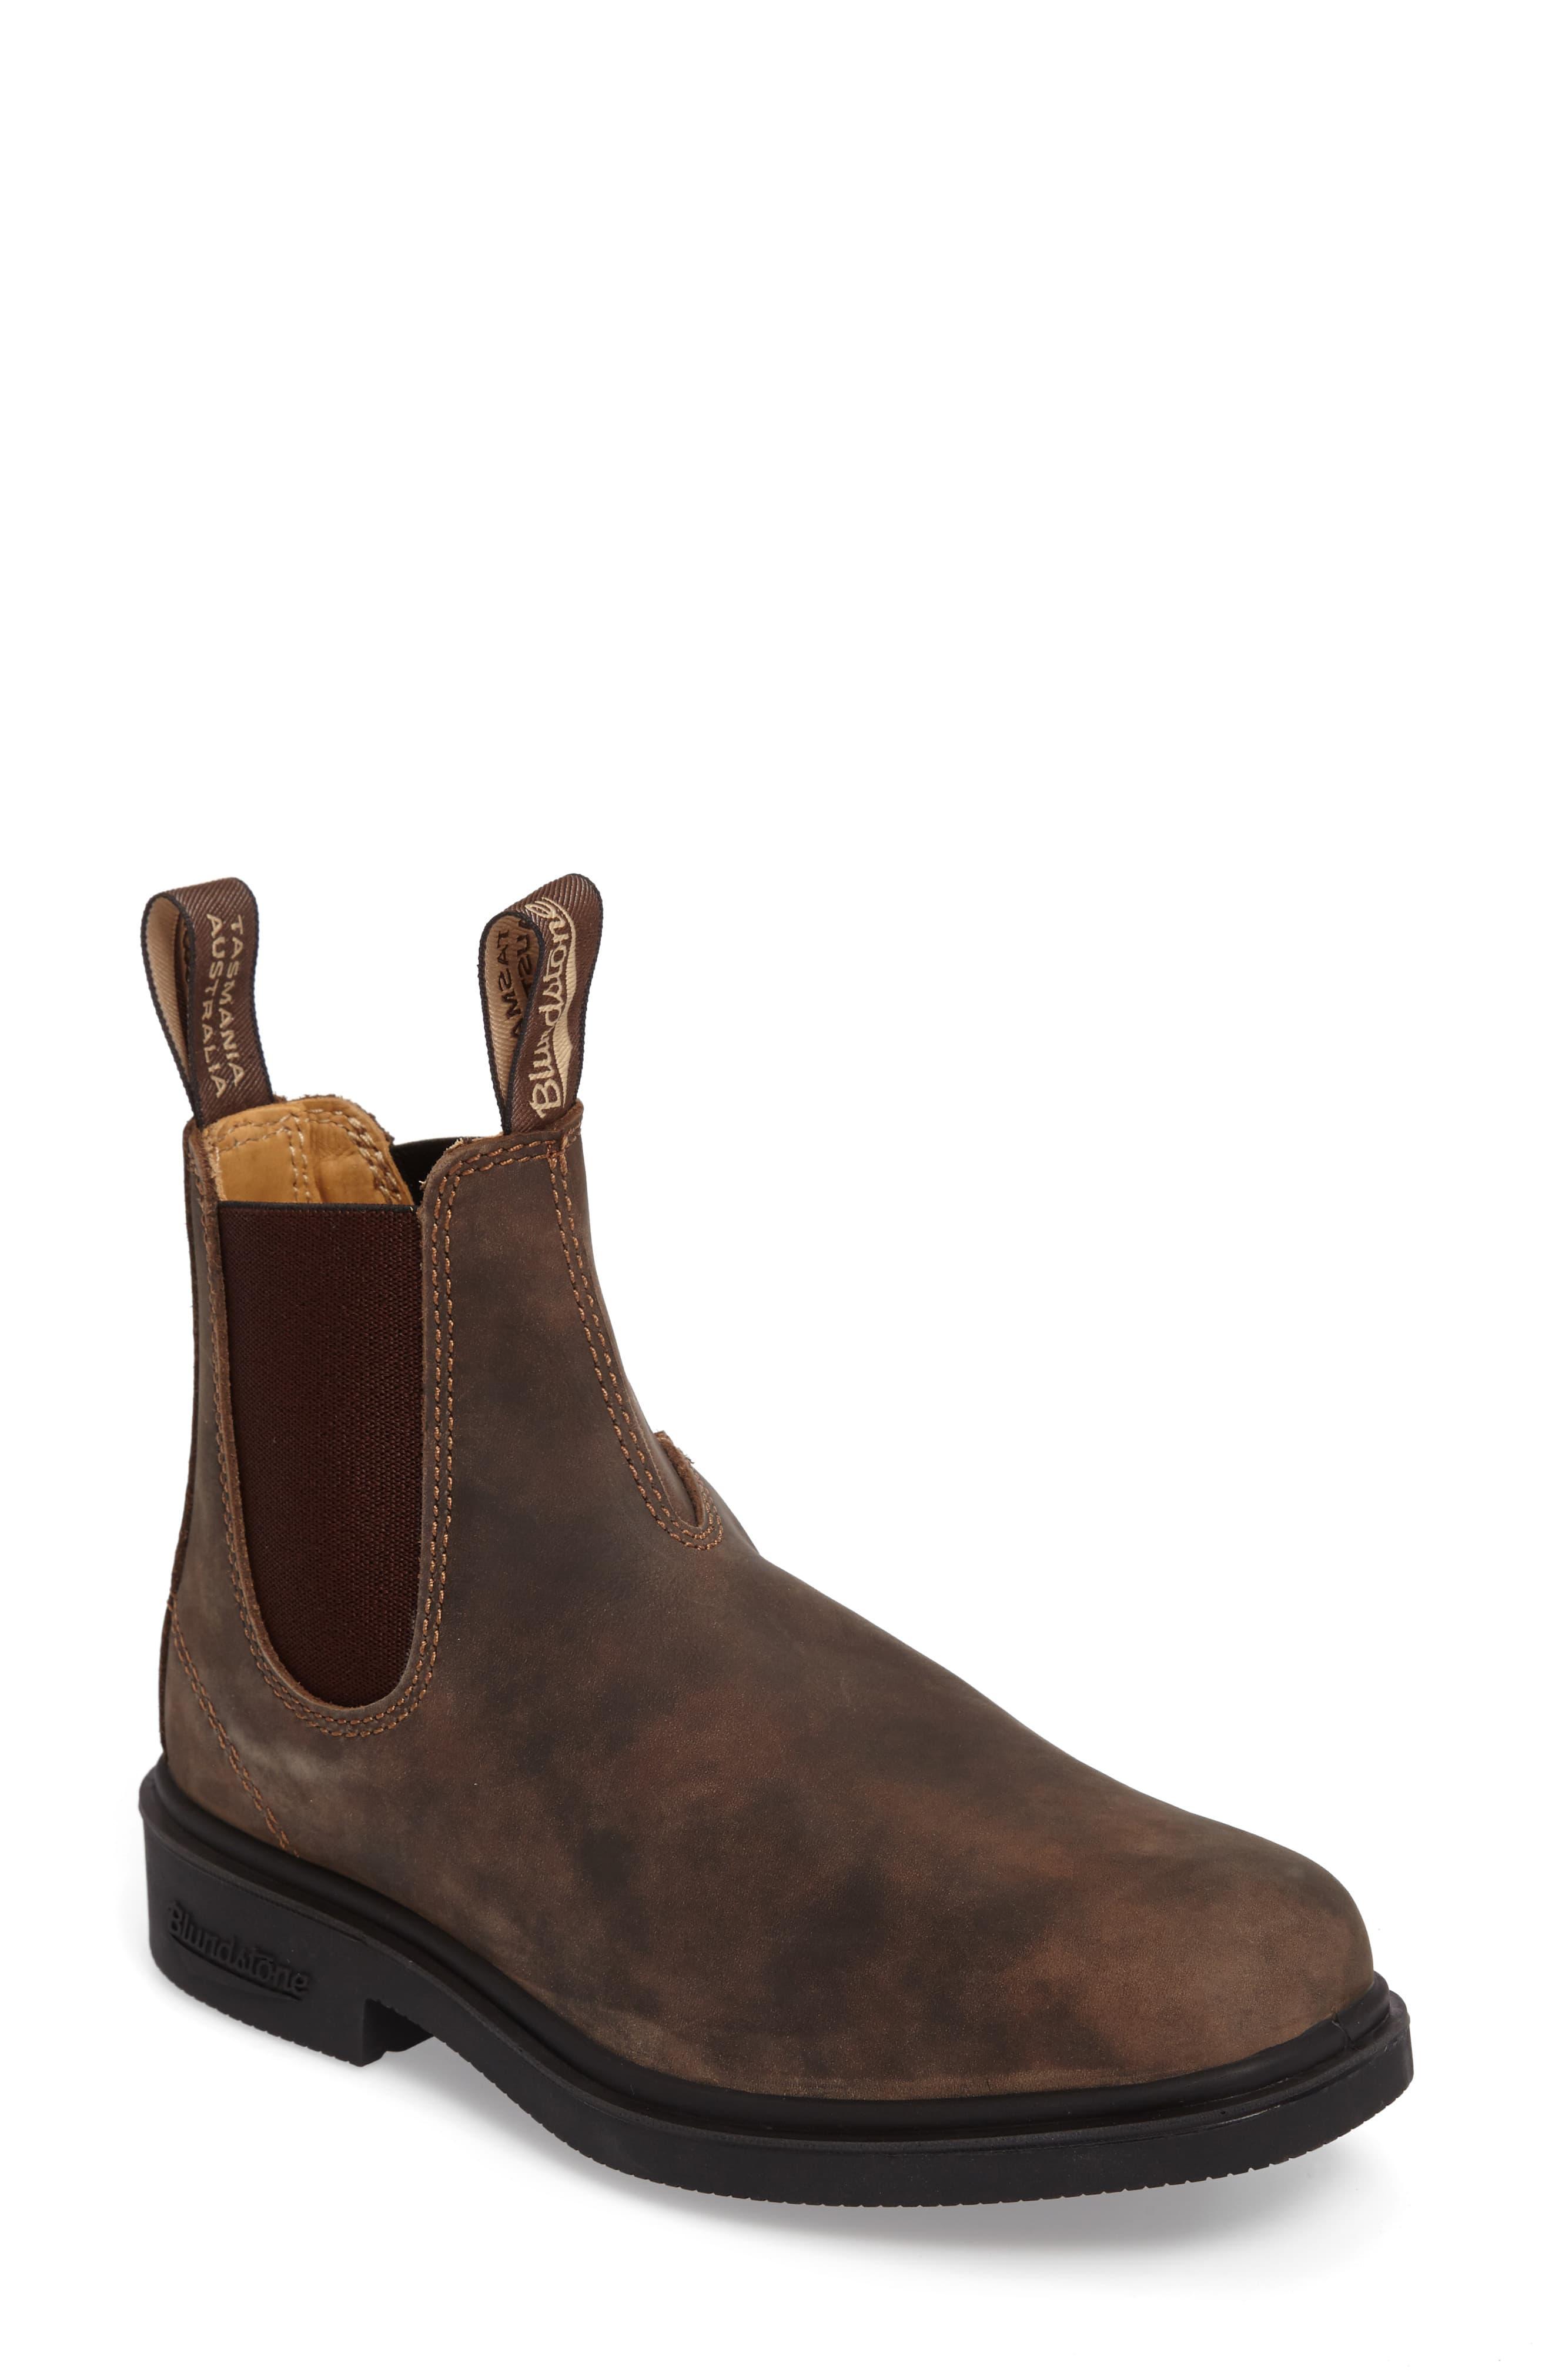 Blundstone Leather Chelsea Boot in Brown - Lyst